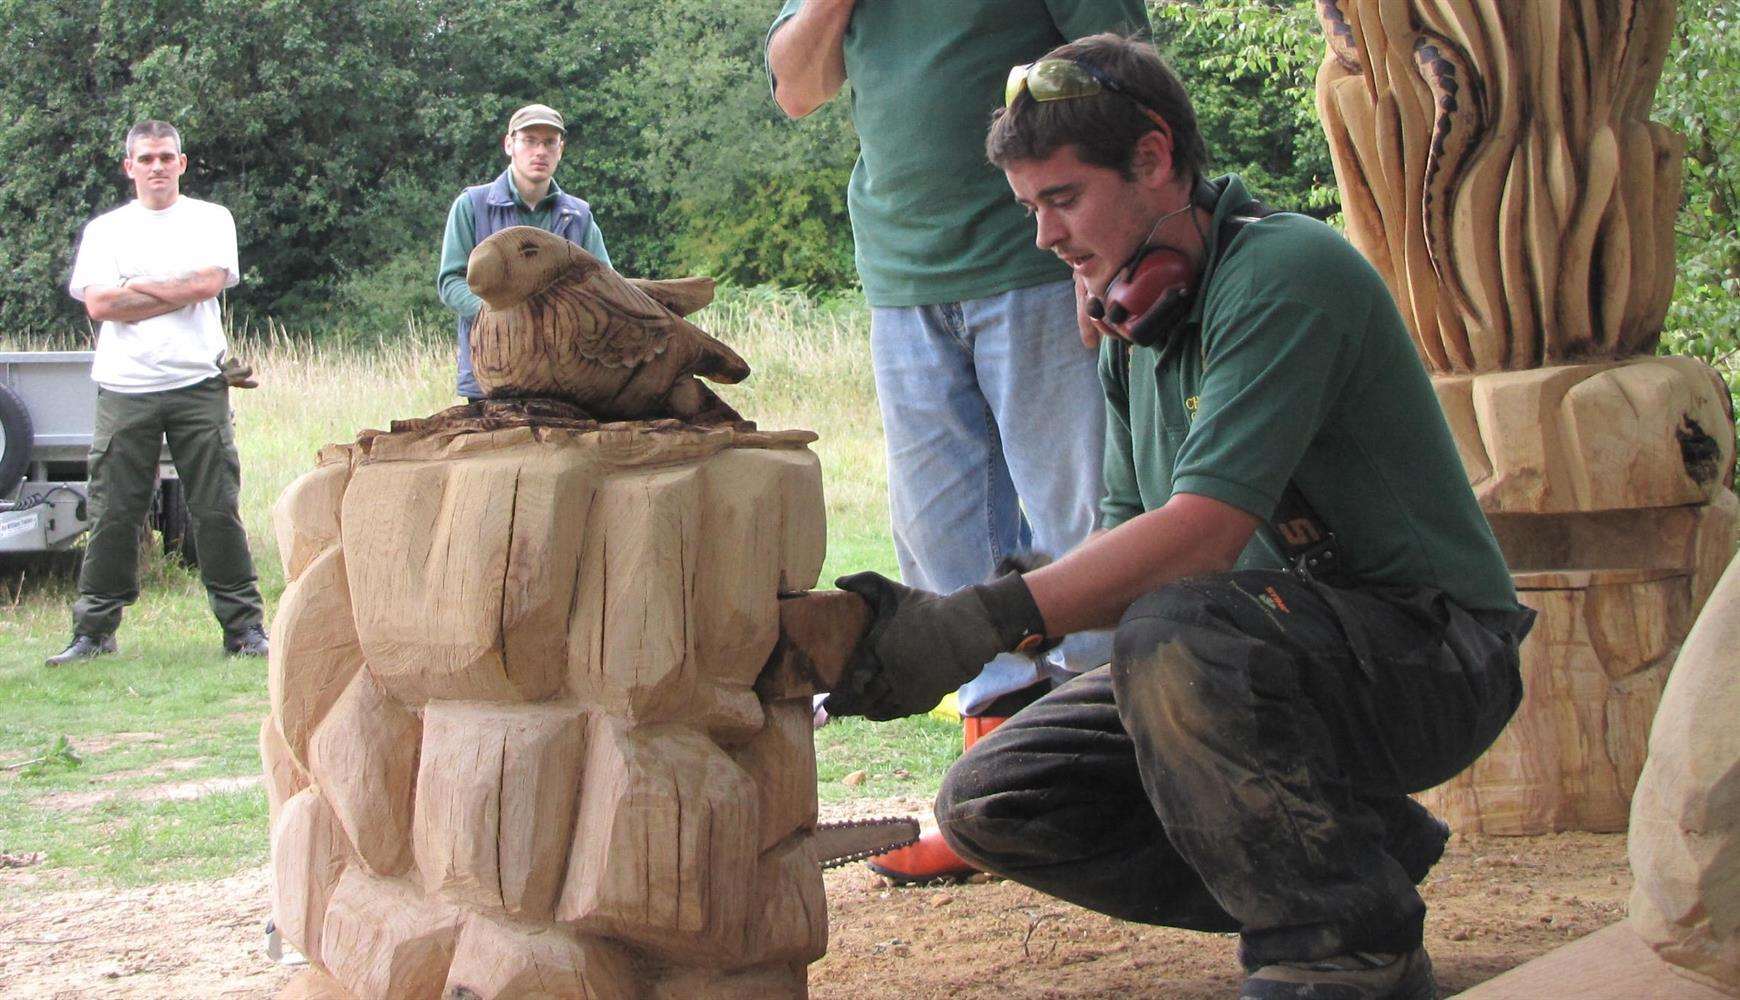 'Chainsaw Dave' Lucas in action on a previous sculpture